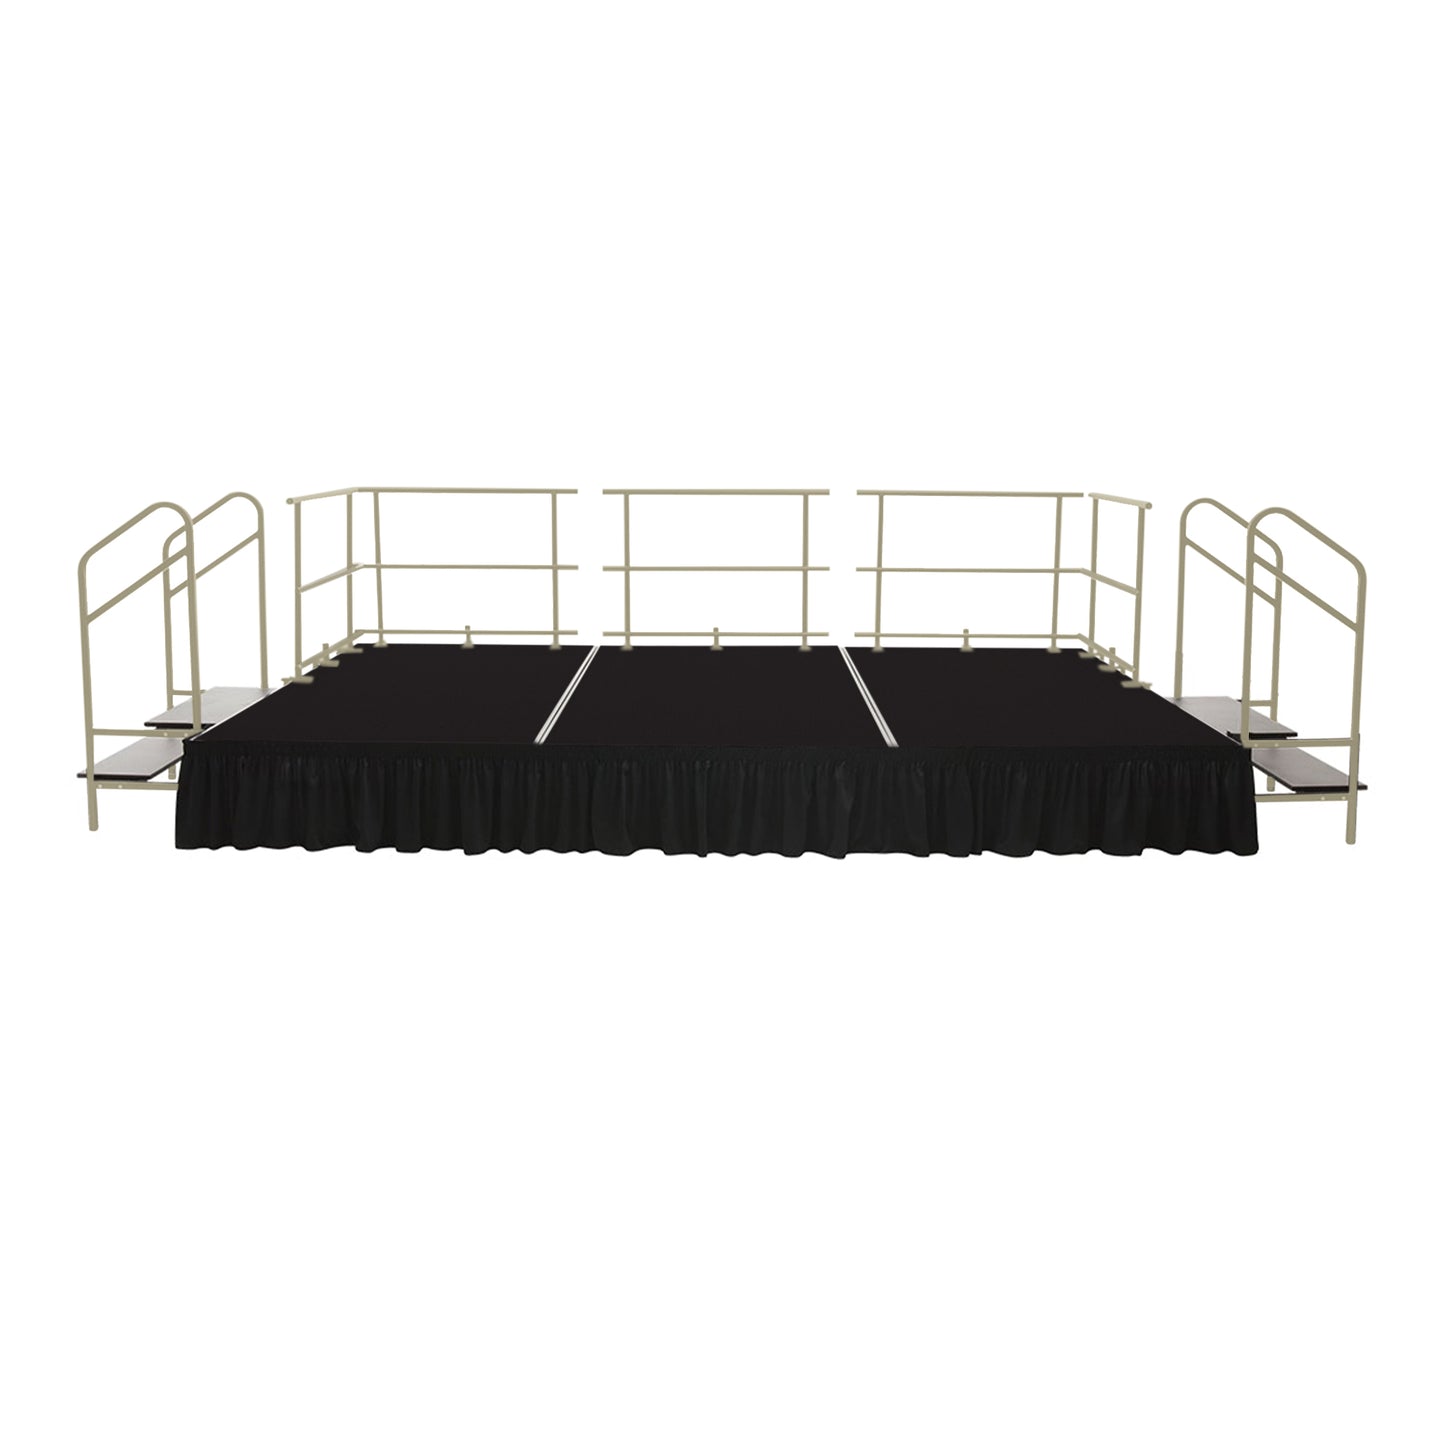 AmTab Fixed Height Stage Set - Polypropylene Top - 16'W x 24'L x 2'H (192"W x 288"L x 24"H)  (AmTab AMT-STS162424P)